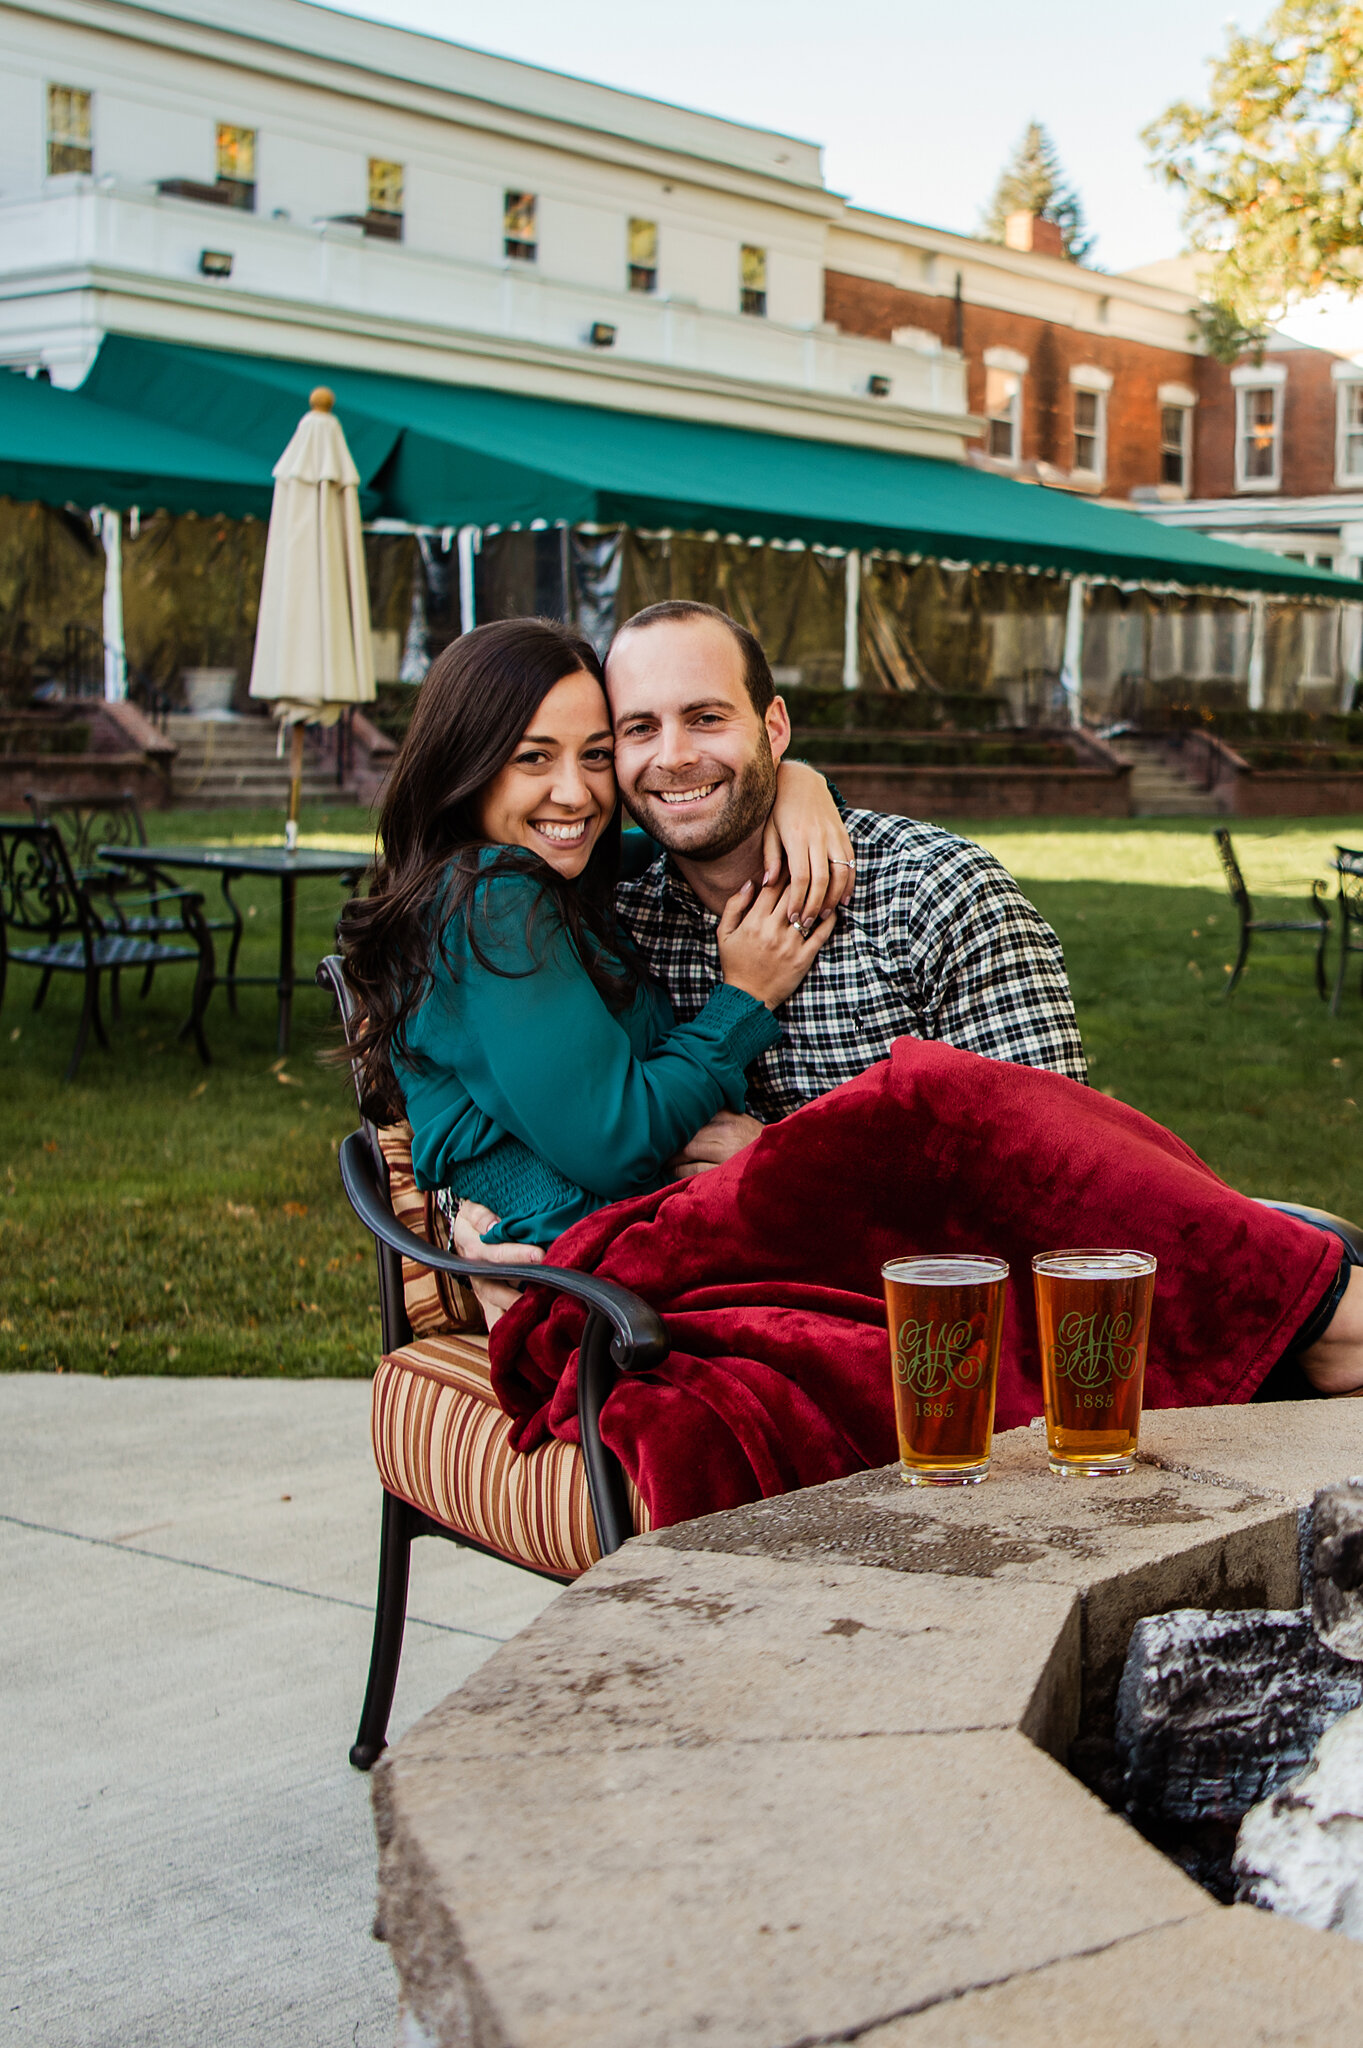 Genesee_Valley_Club_High_Falls_Rochester_Engagement_Session_JILL_STUDIO_Rochester_NY_Photographer_1346.jpg